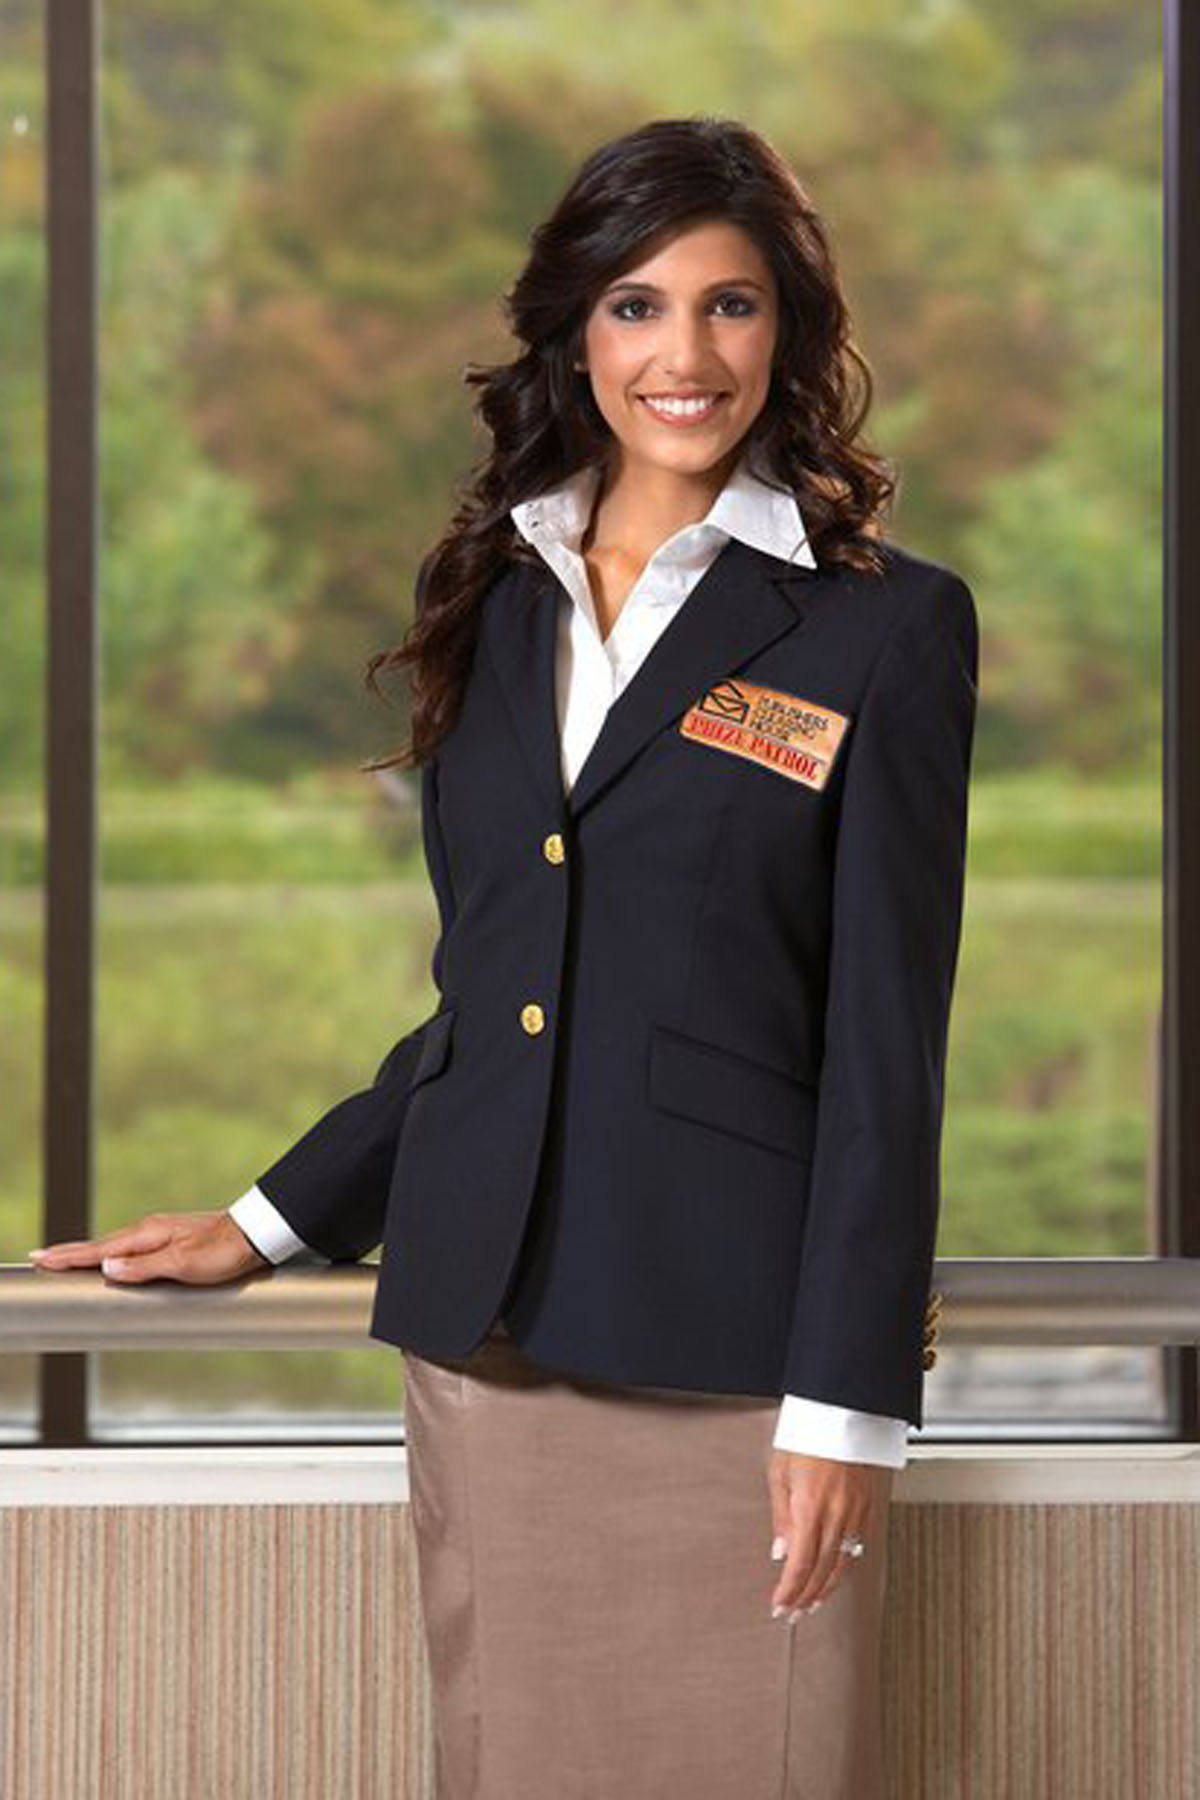 New Prize Patrol Member Danielle Lam Answers Questions | PCH Blog